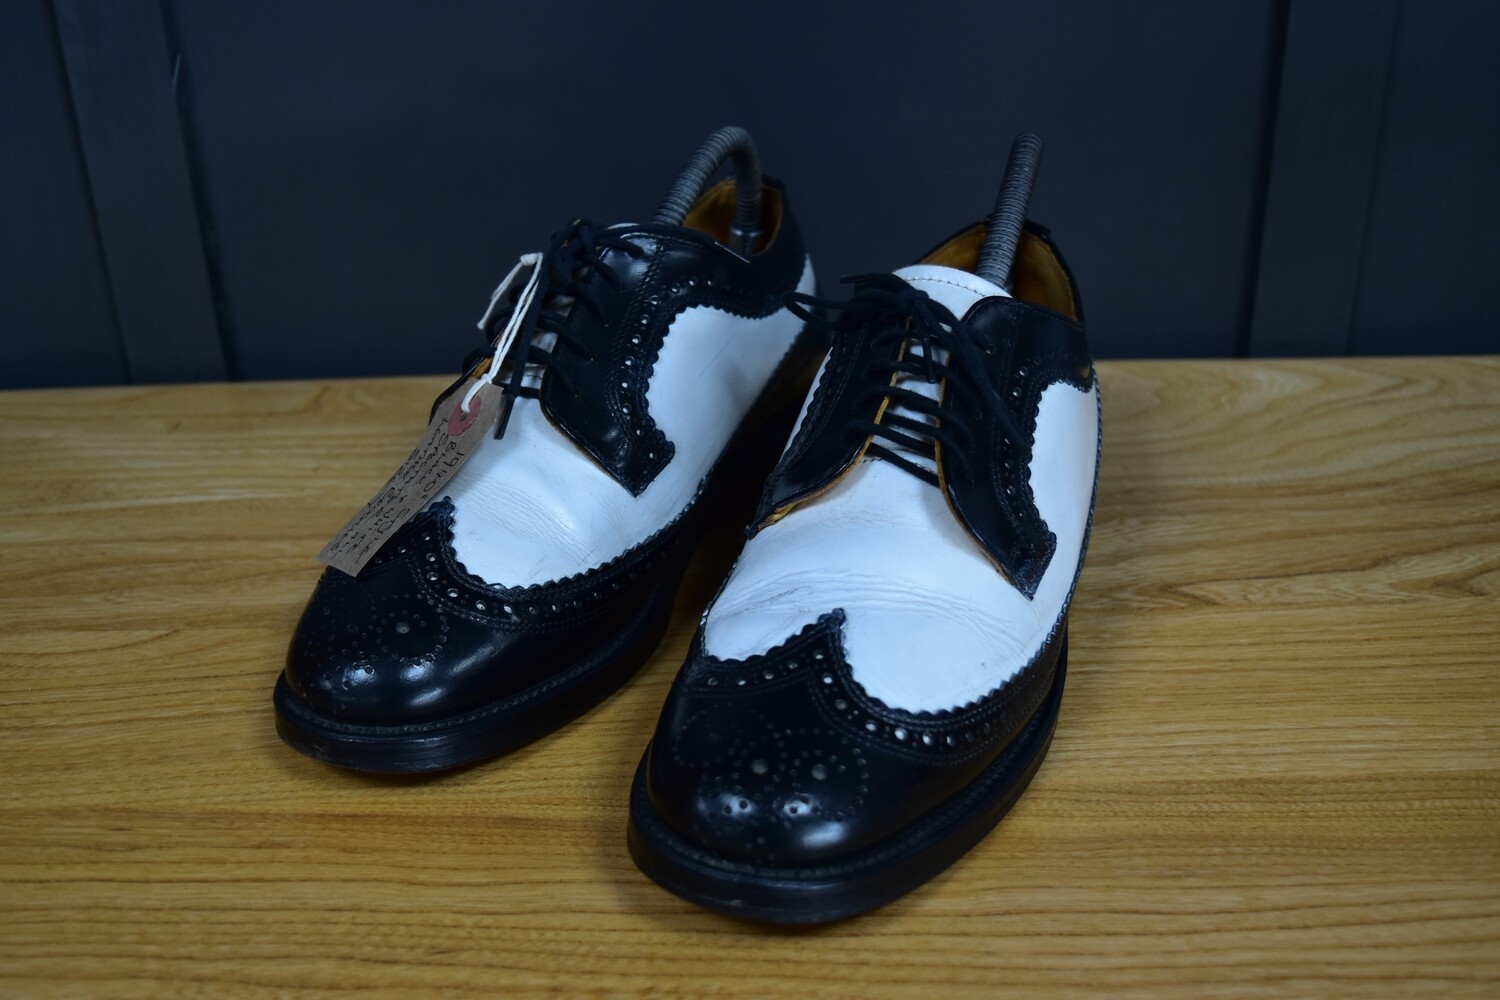 1940s Style Black & White Leather Brogues